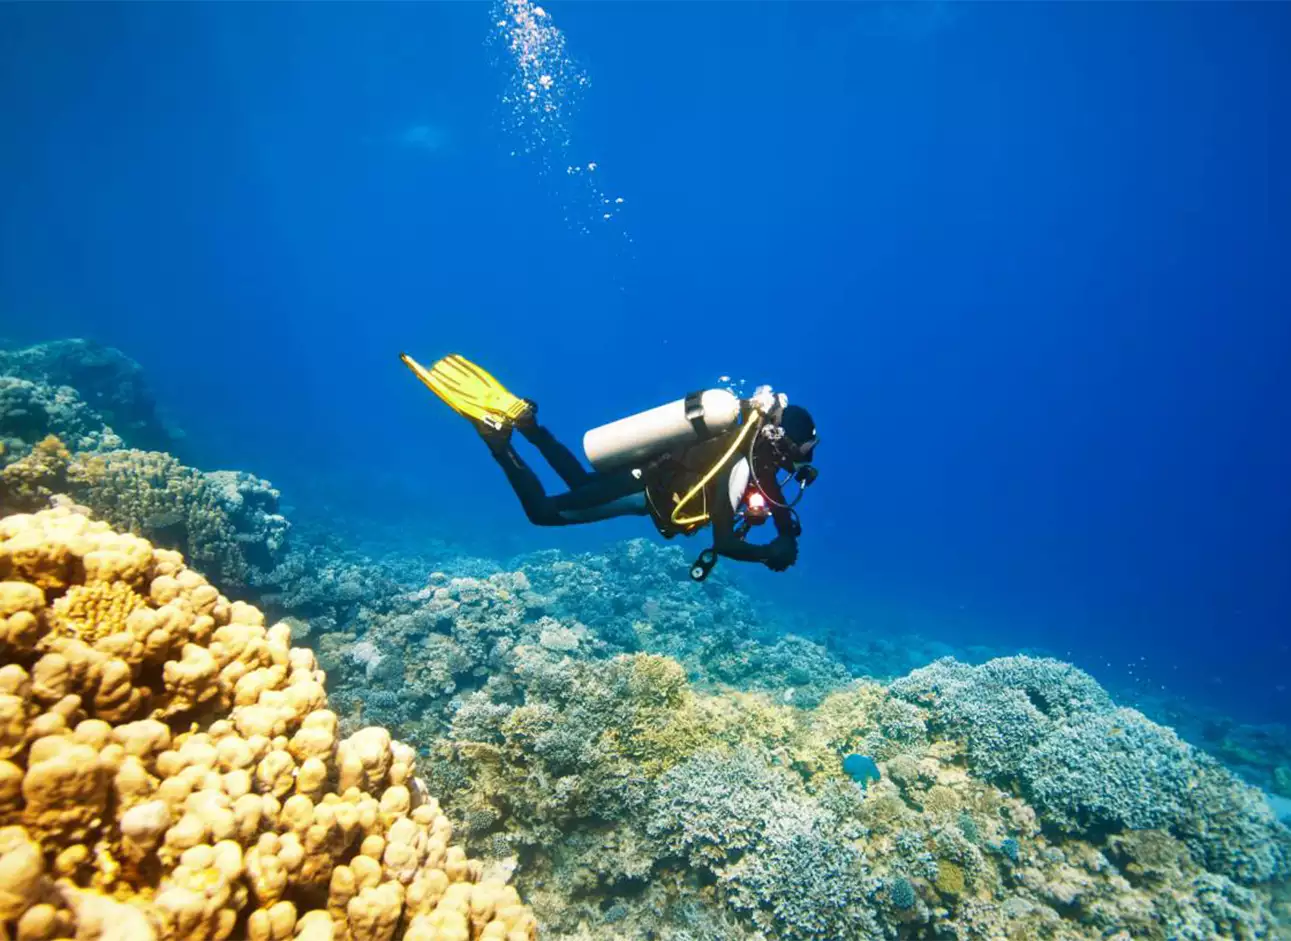 Scuba Diving - Explore the underwater world on thrilling dives